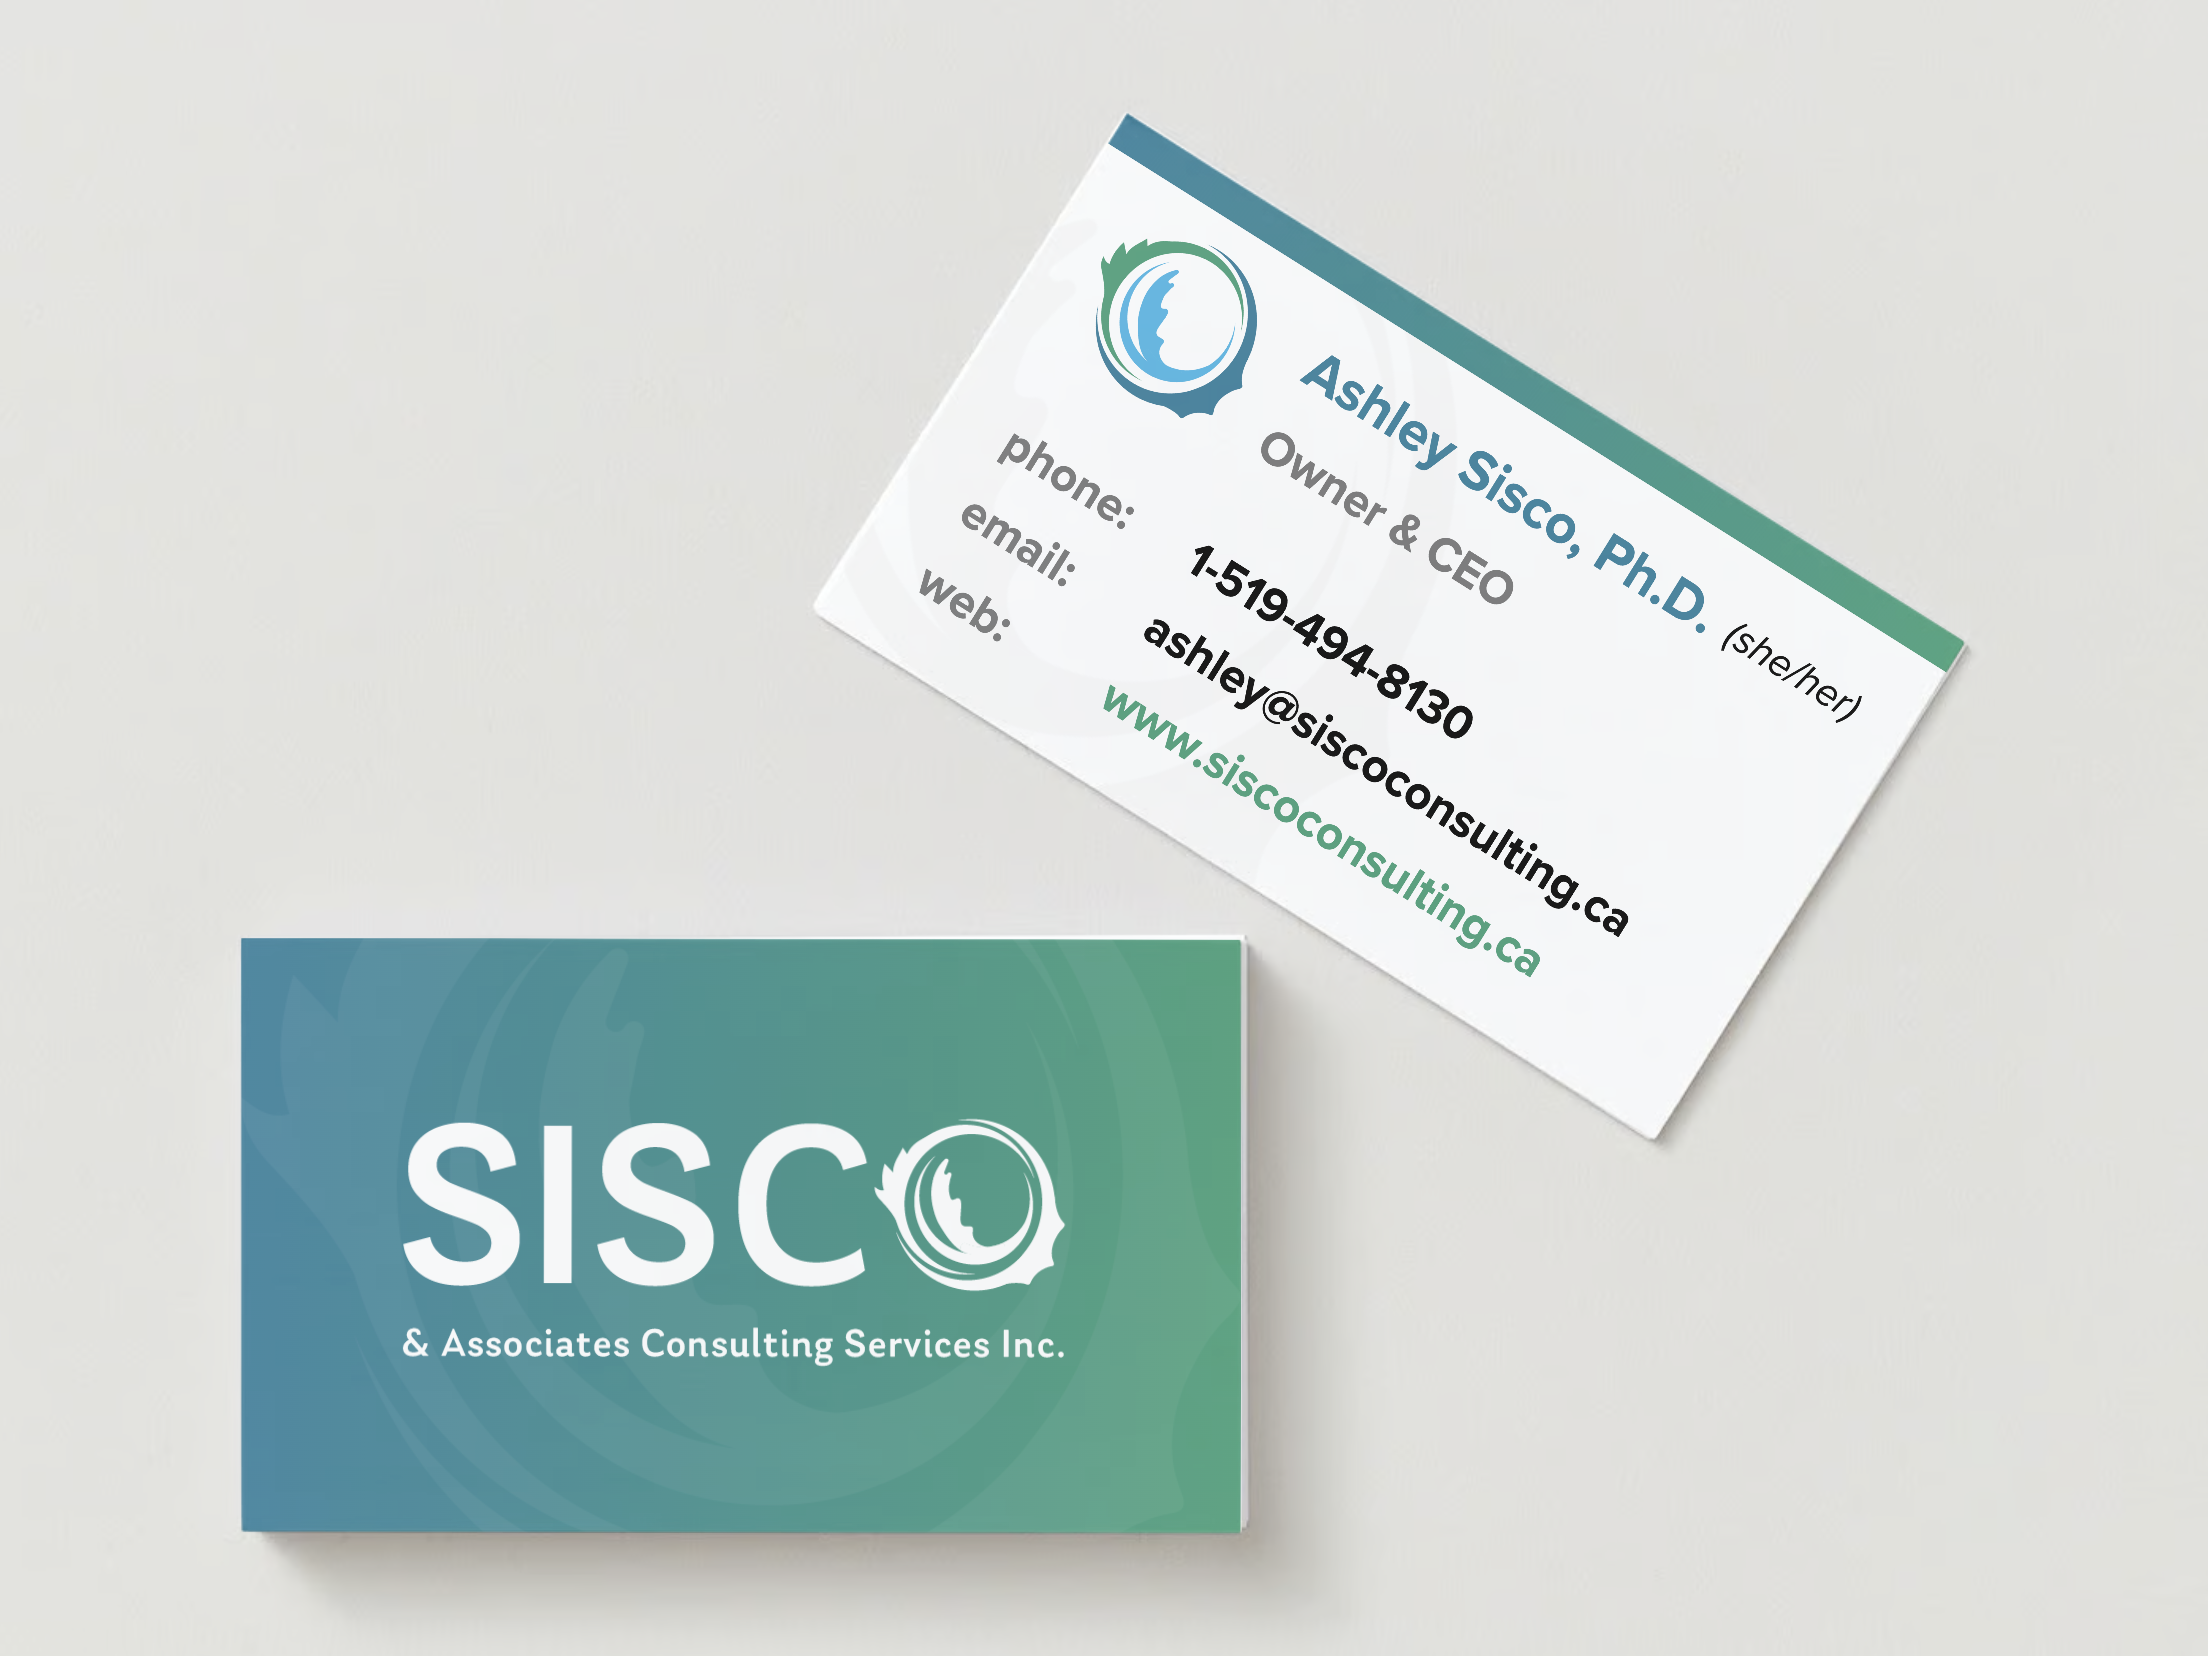 katie-wilhelm-sisco-consulting-logo-card.png